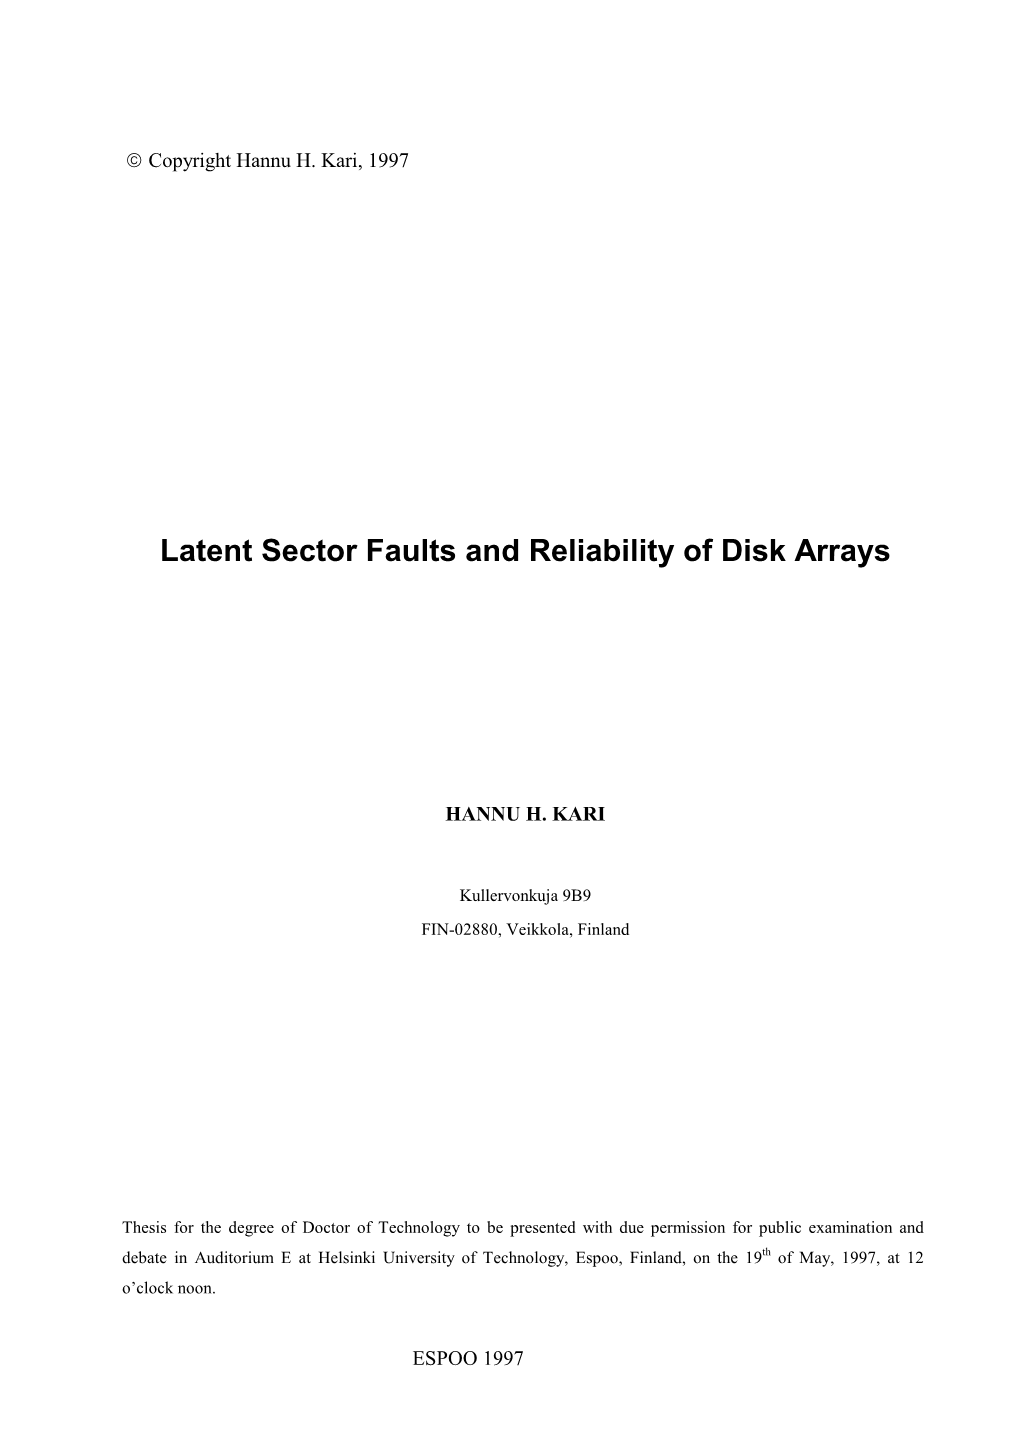 Latent Sector Faults and Reliability of Disk Arrays